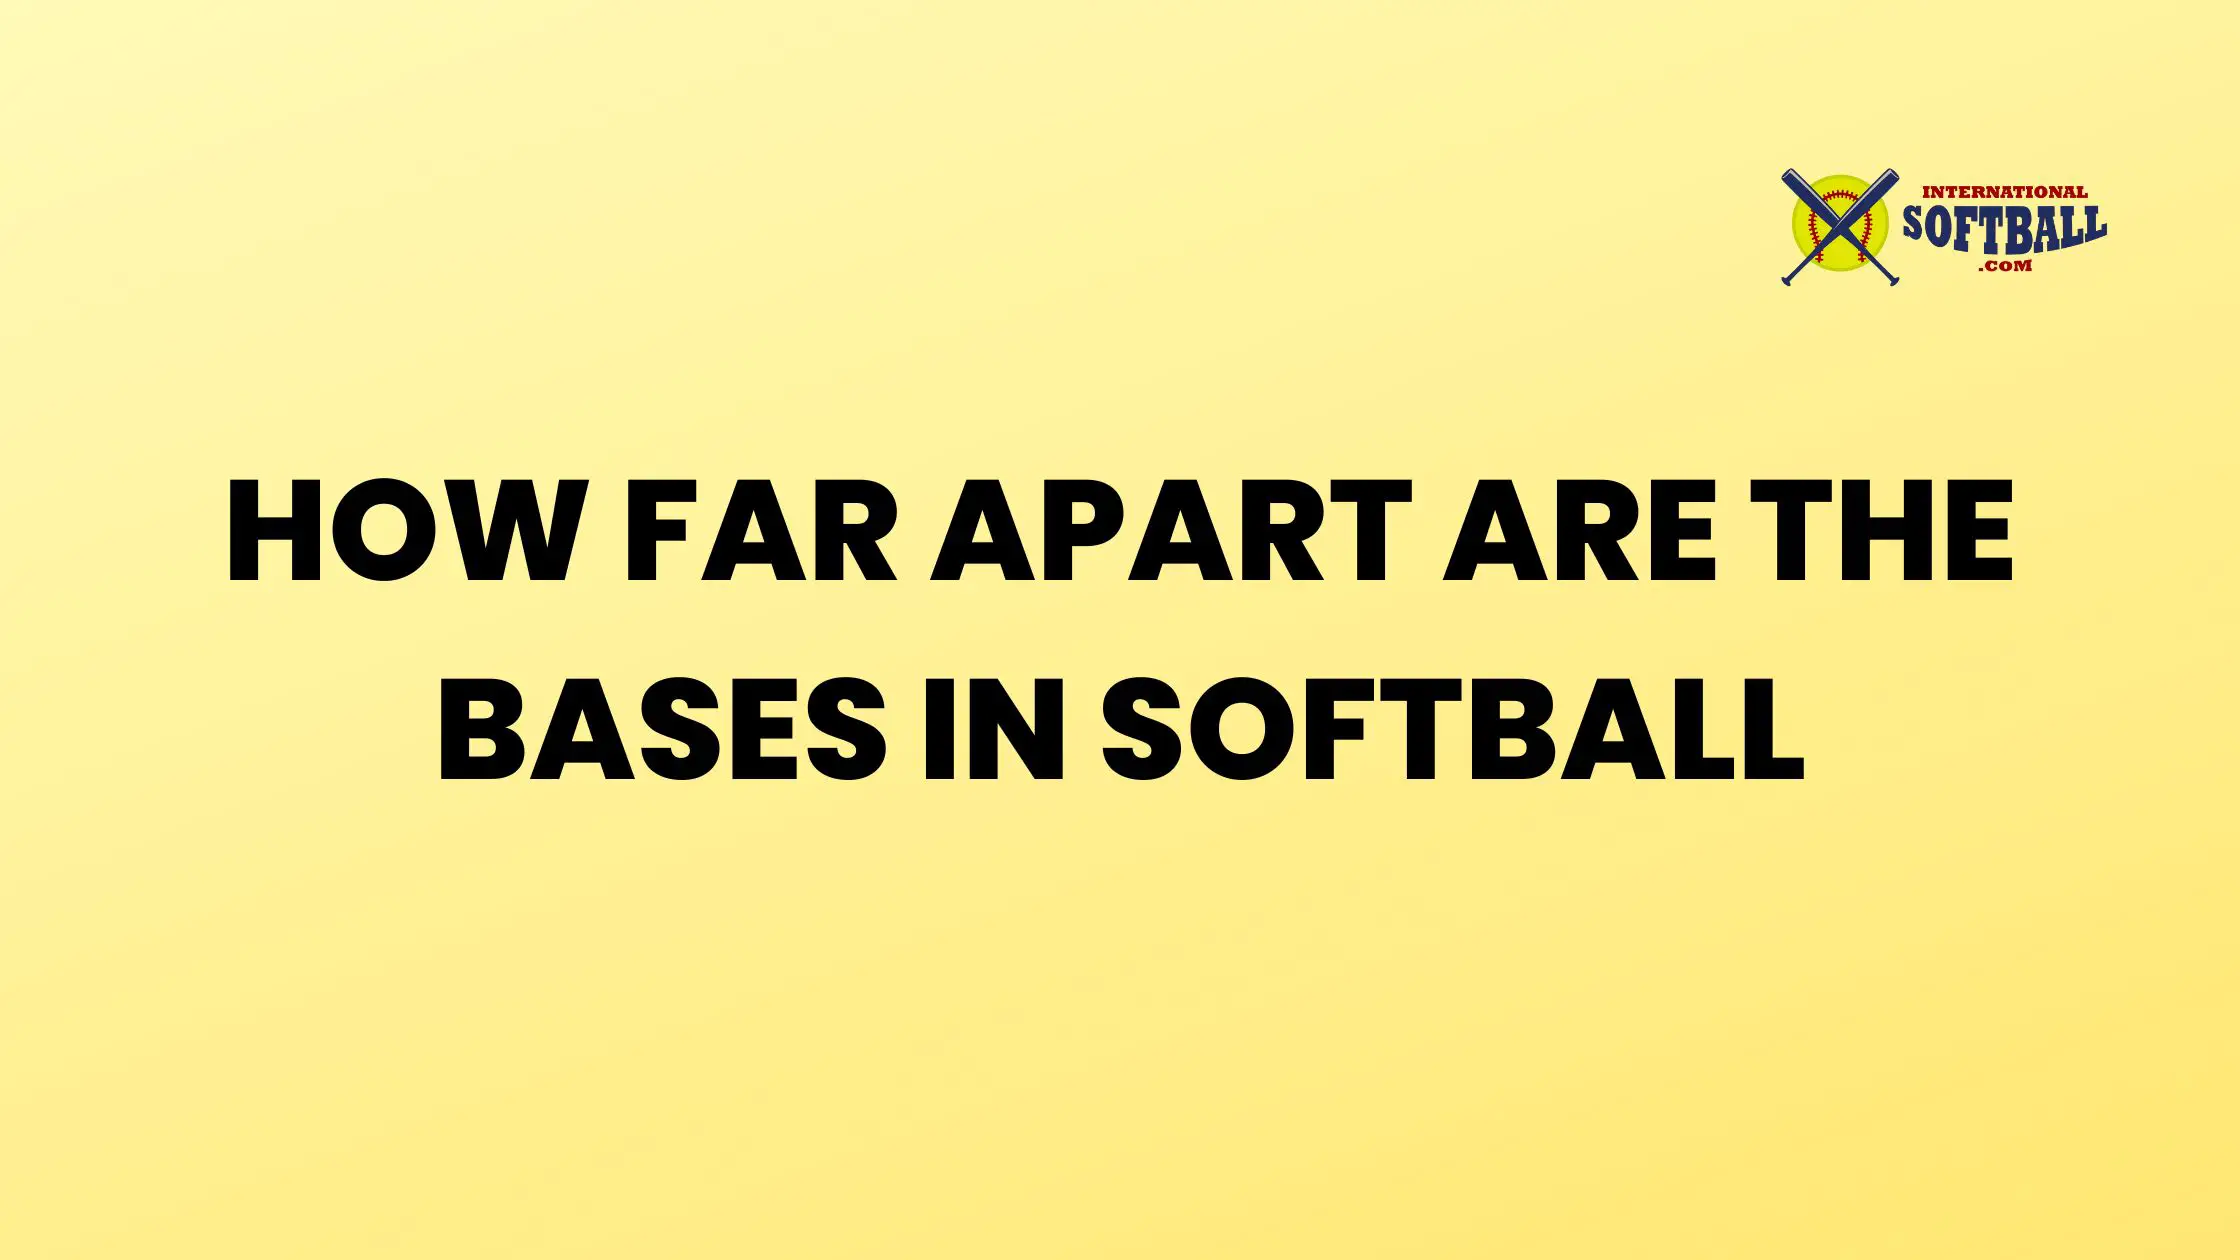 How far apart are the bases in softball